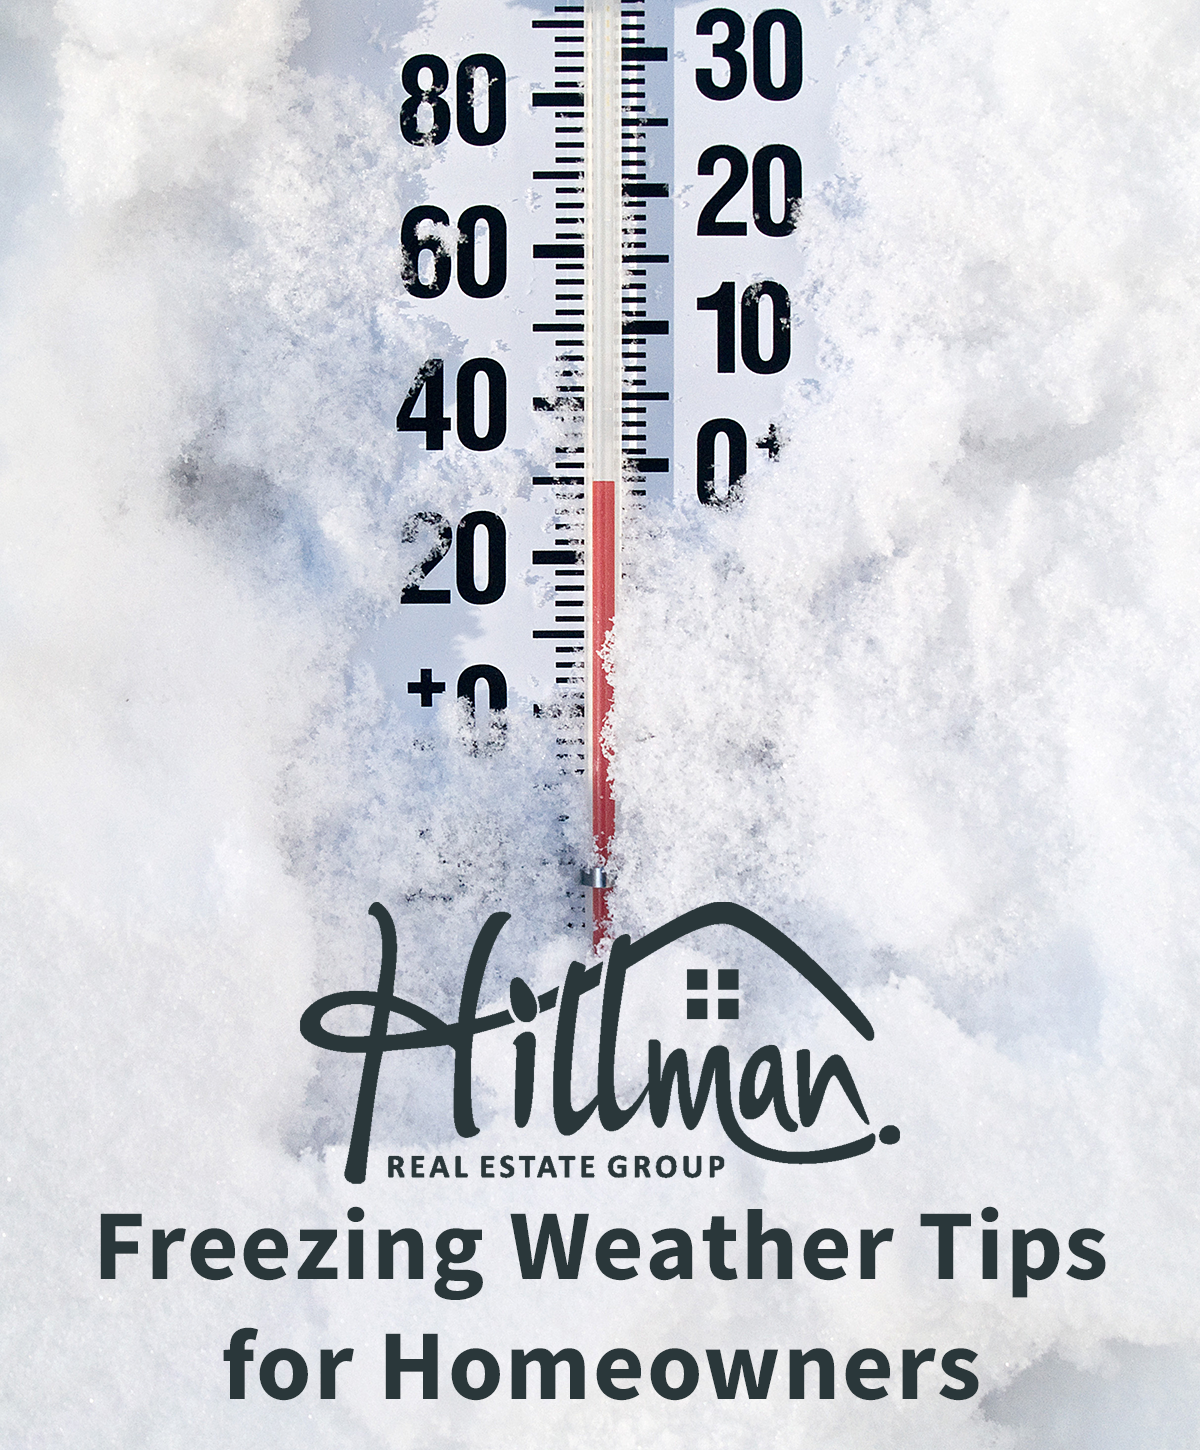 Hillman Real Estate Group shares winter weather tips for homeowners